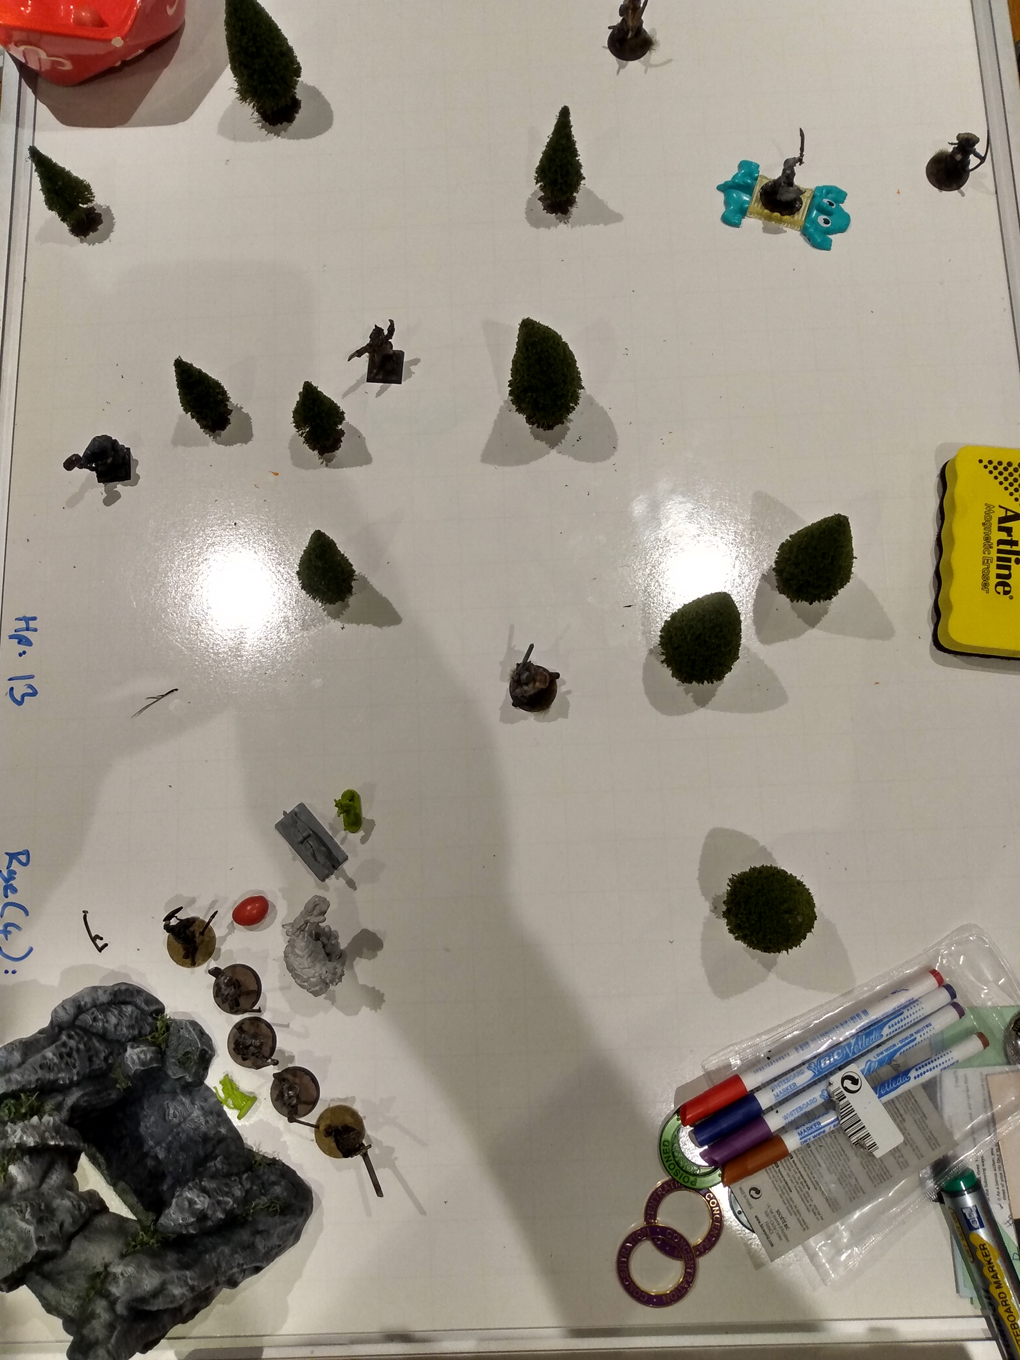 The whiteboard we use for D&D with a cave mouth and miniature trees scattered over it. Several miniatures line up for combat.